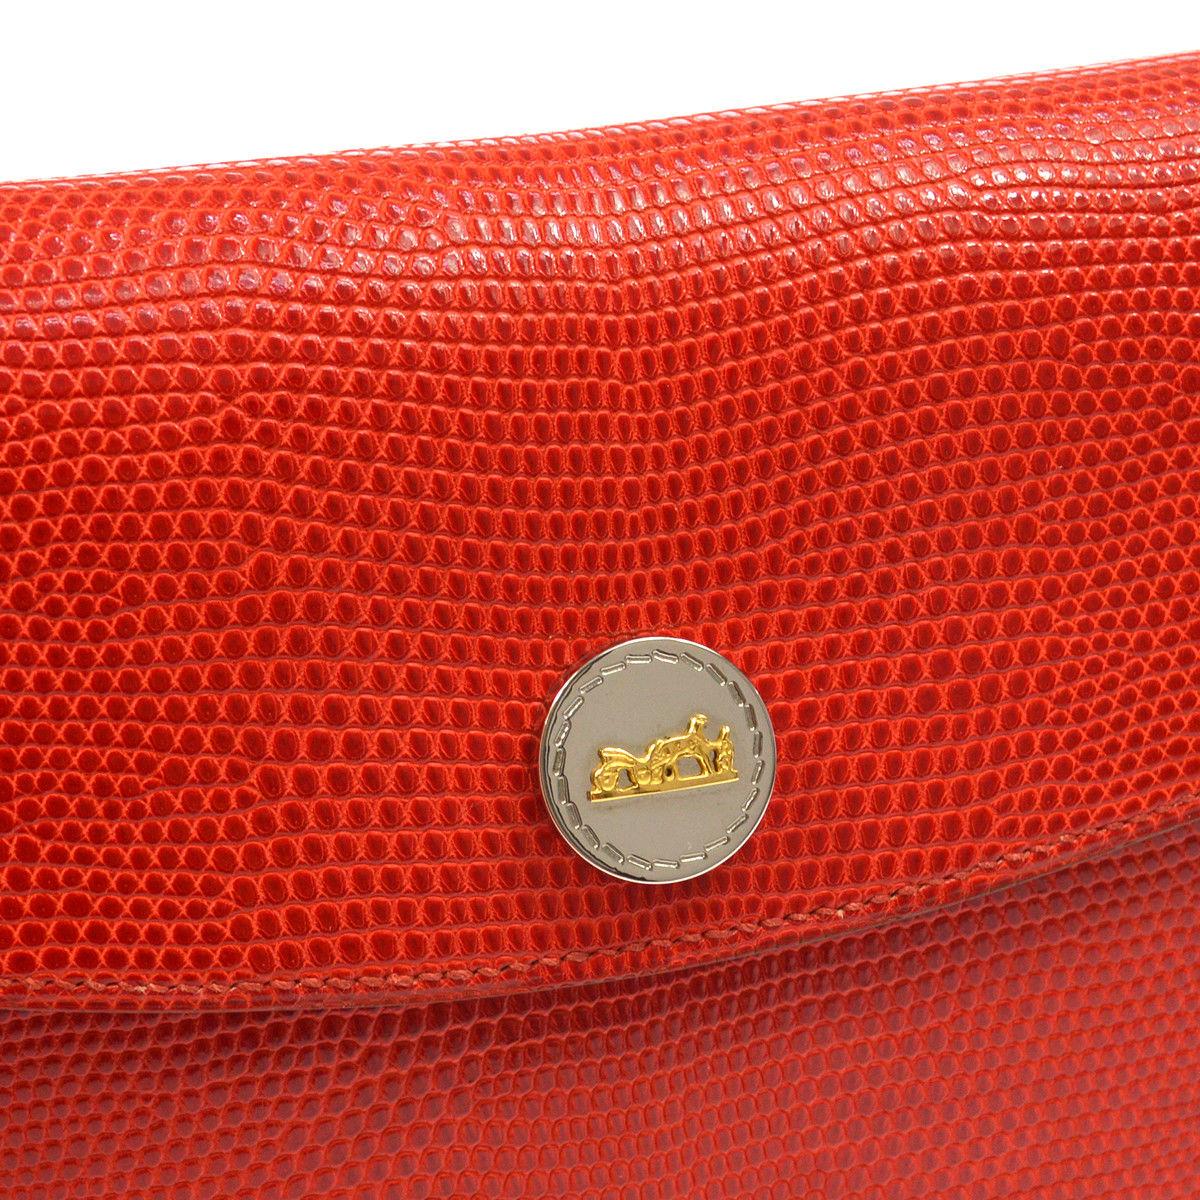 Hermes Red Lizard Exotic Leather Silver Evening Envelope Clutch Flap Bag

Lizard
Silver tone hardware
Leather lining
Snap closure
Date code present
Made in France
Measures 9.5